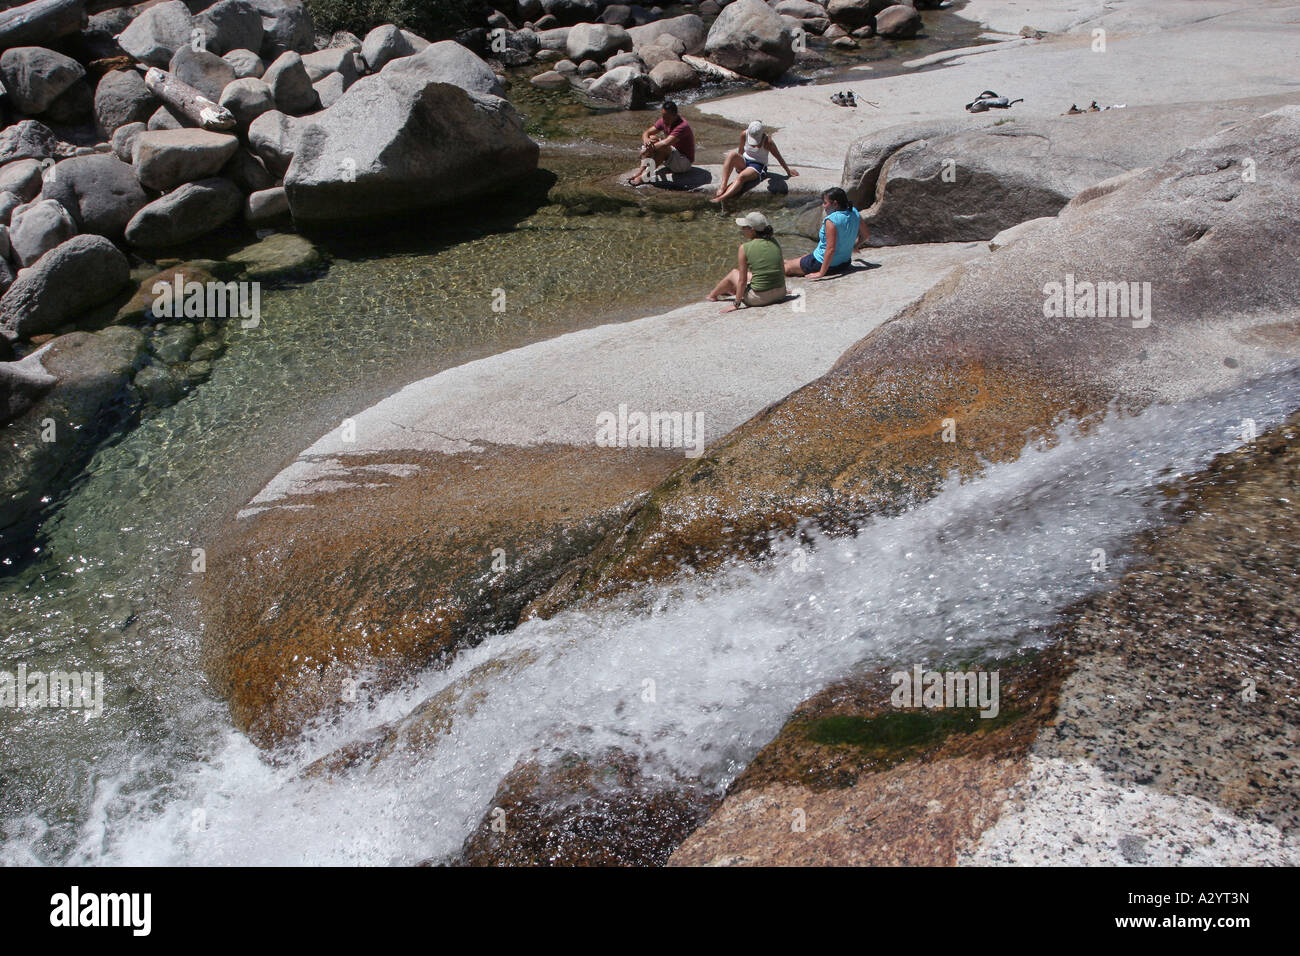 hikers cooling off in creek Sequoia National Park California Stock Photo